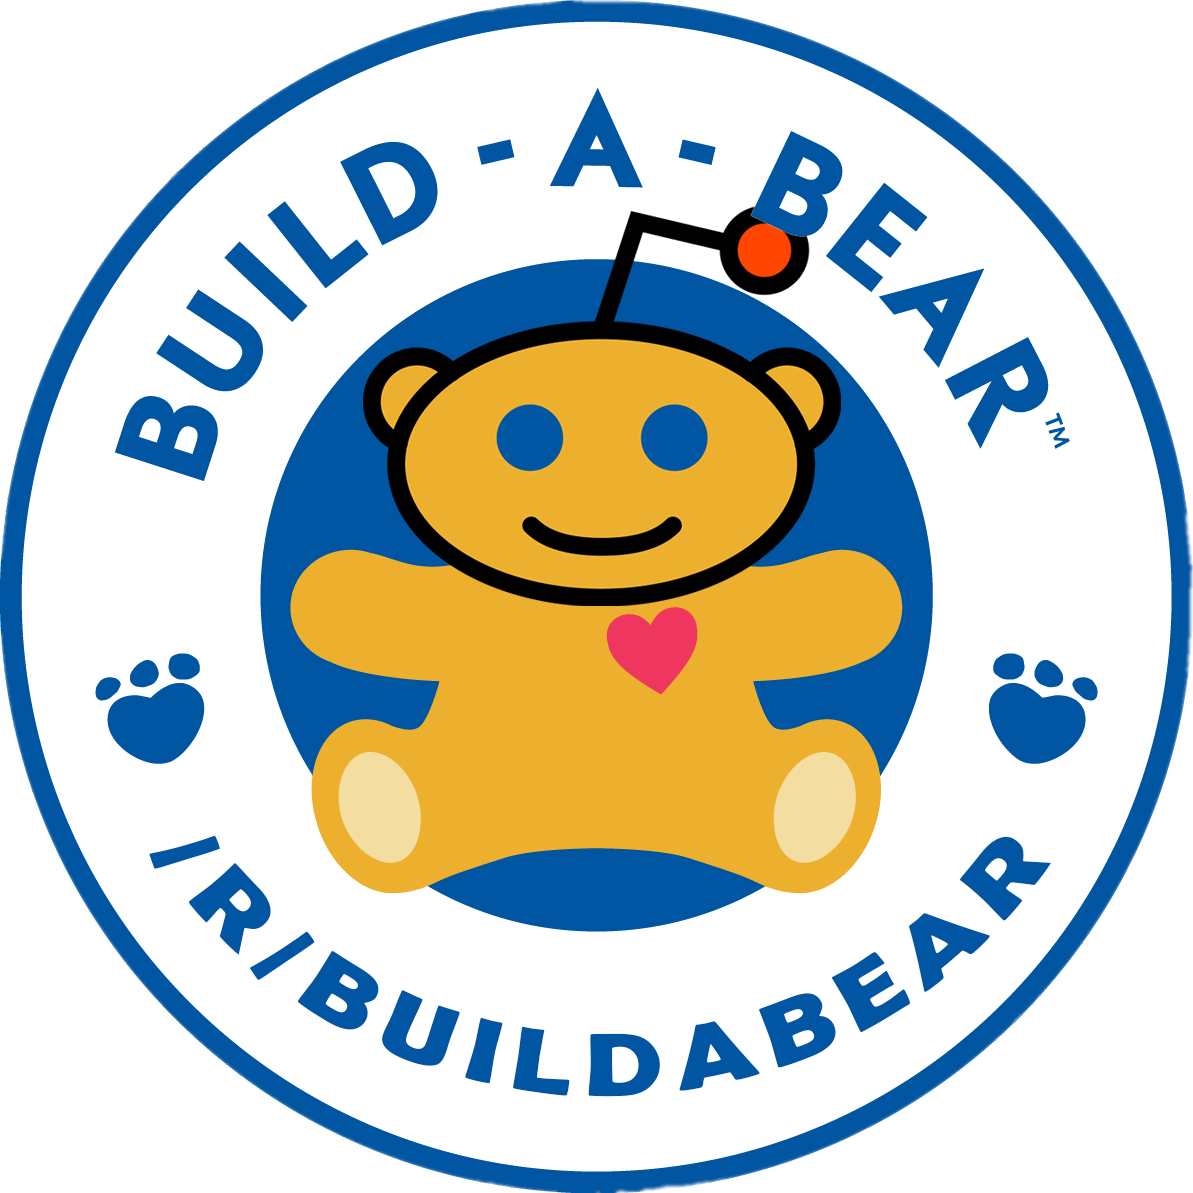 Accessing W2 As A Former Employee? : R/Buildabear intended for Rack Room Shoes W2 Former Employee